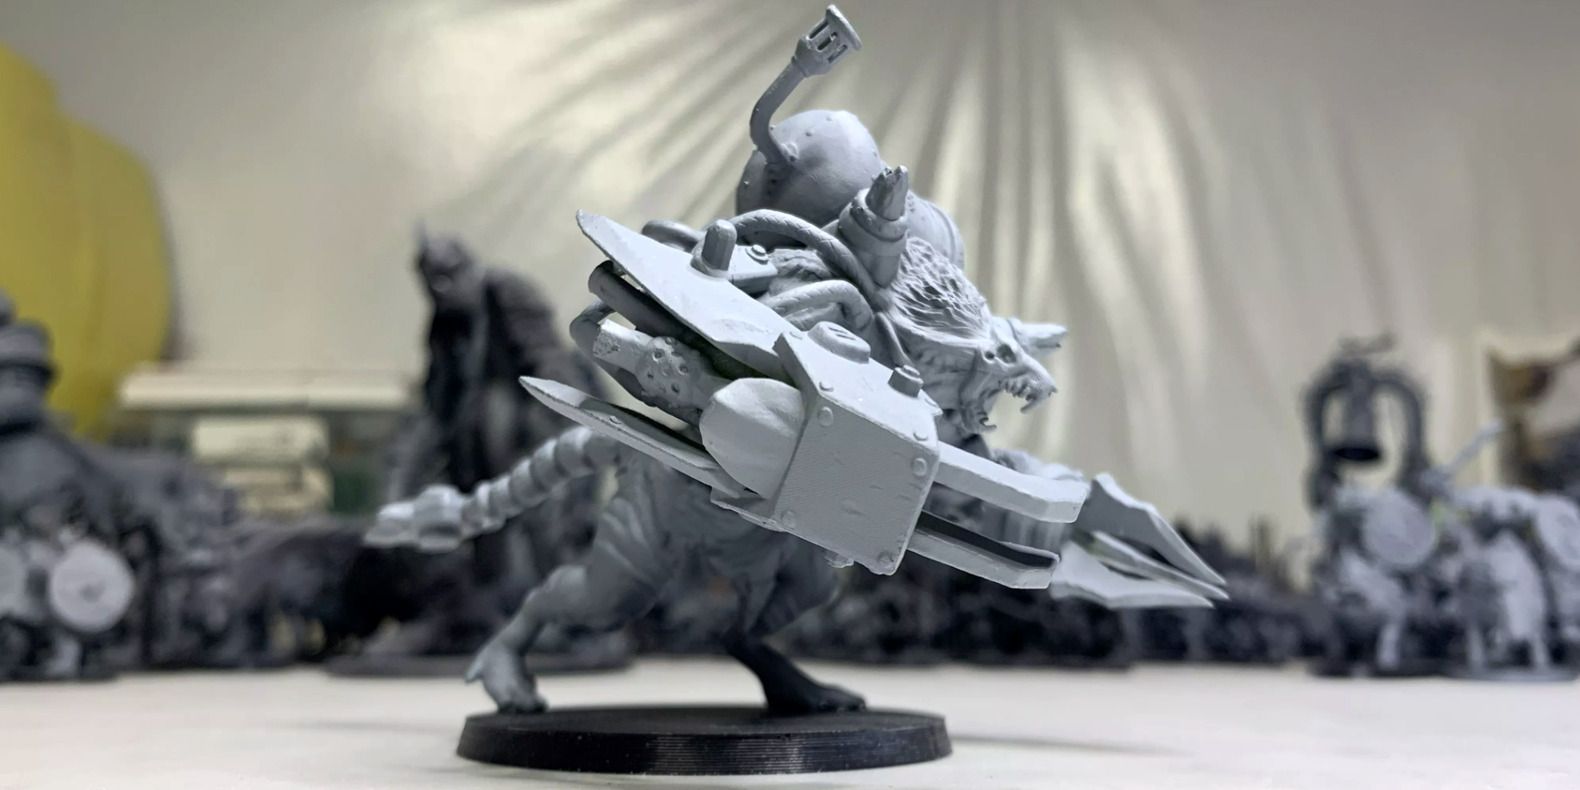 Here is a selection of the best 3D printable STL files for 3D printer to play Warhammers